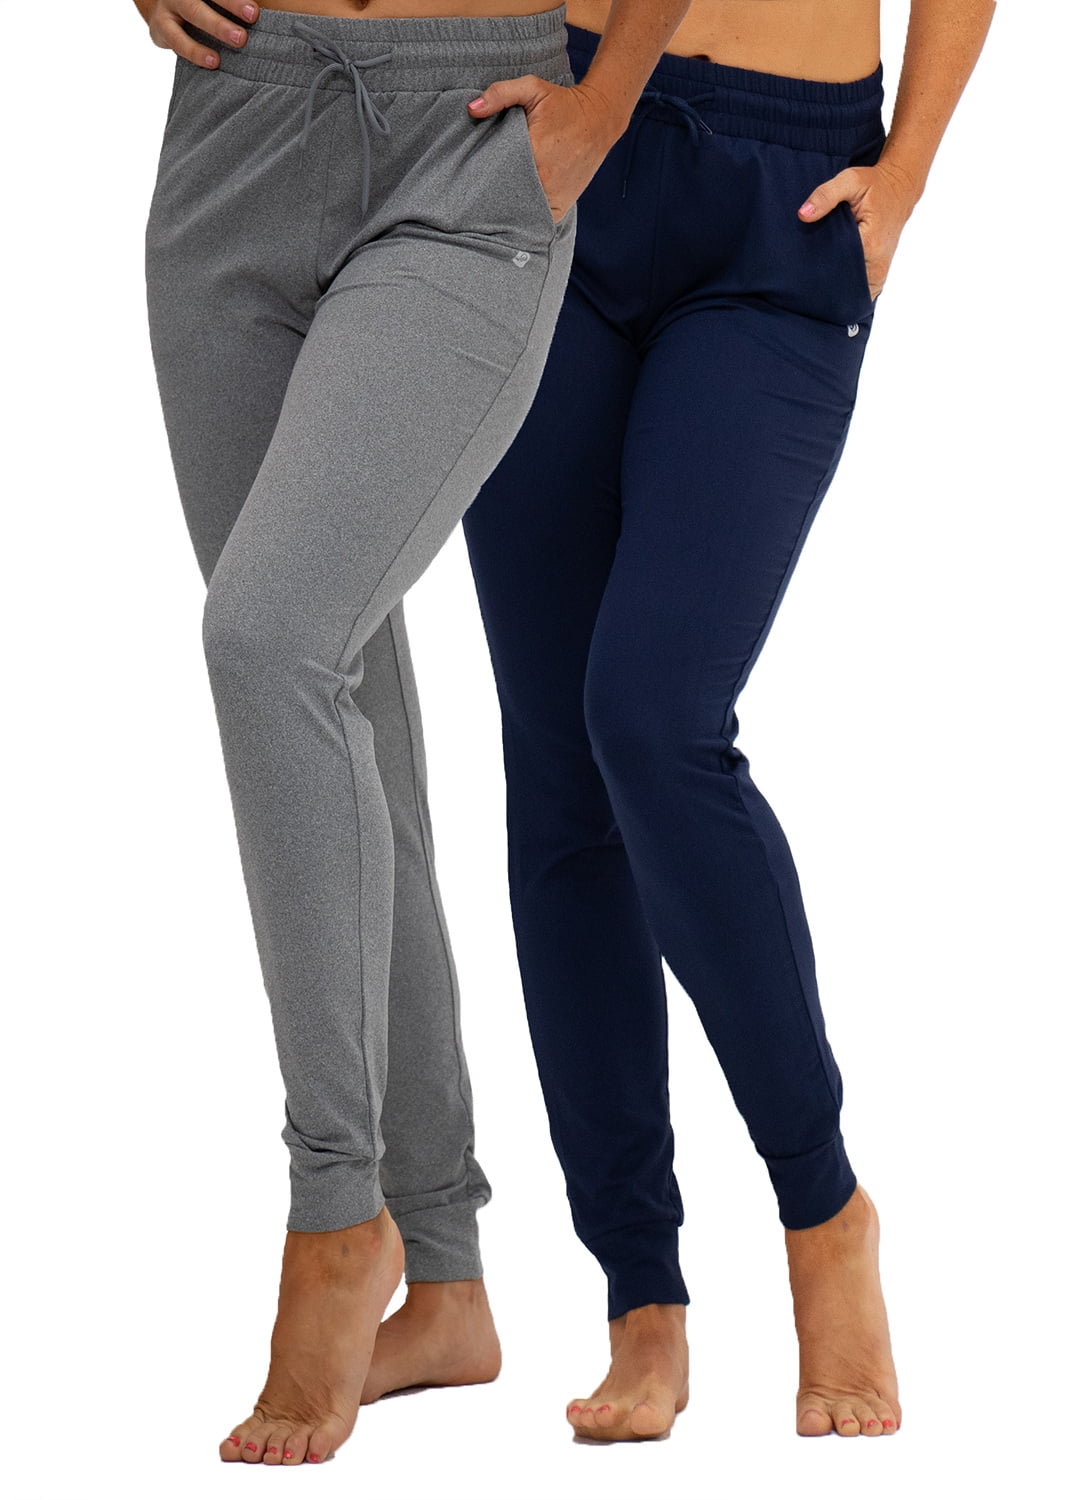 Halara Jogger Pants Blue Size S petite - $29 (27% Off Retail) New With Tags  - From Antonia